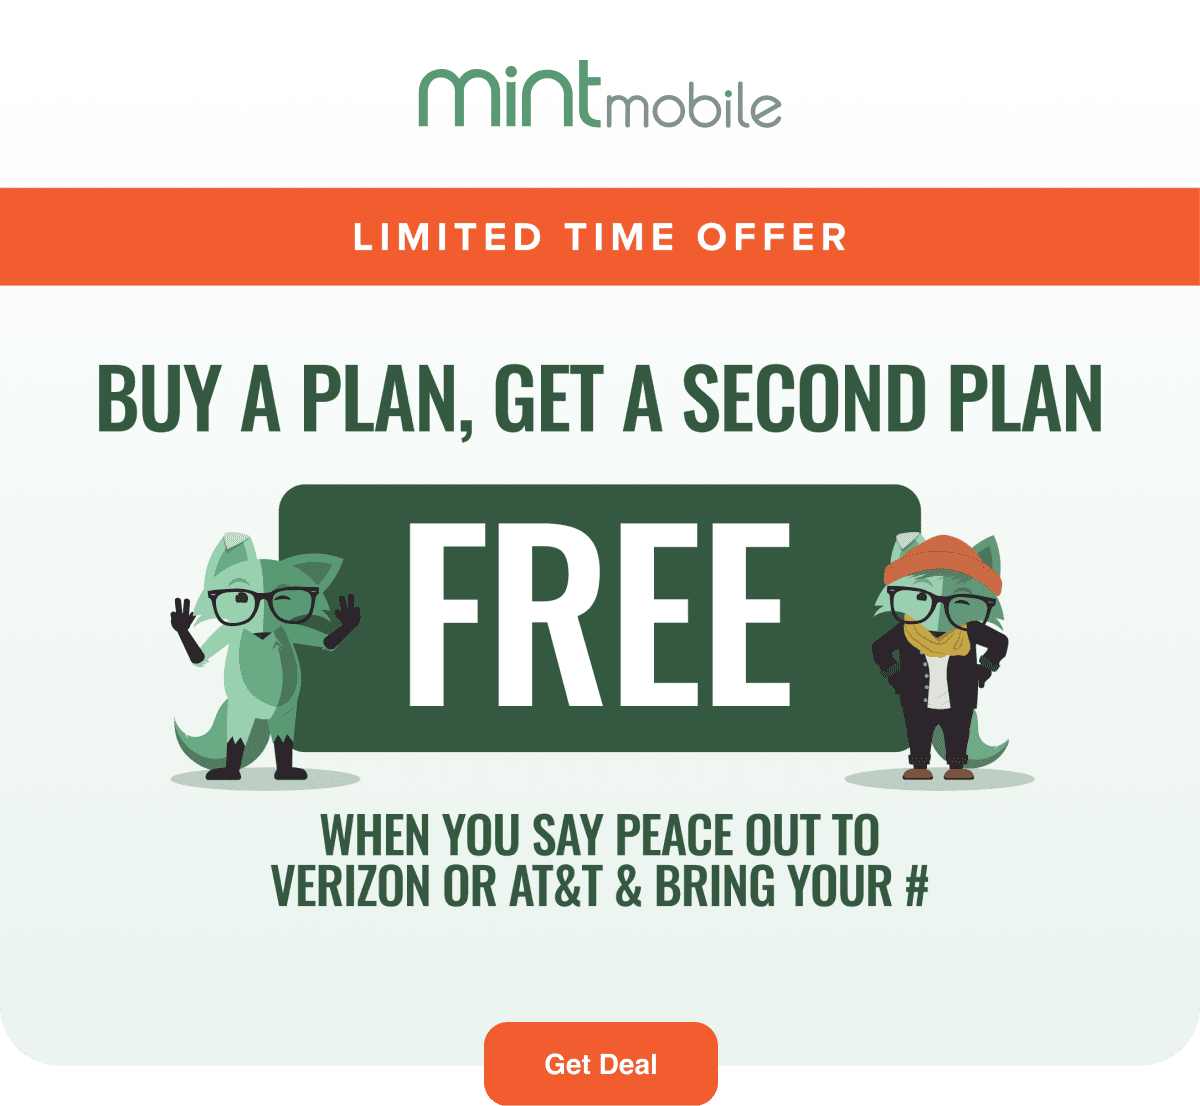 Limited Time Offer: Buy a plan, get a second plan FREE when you say peace out to Verizon or AT&T & bring your #